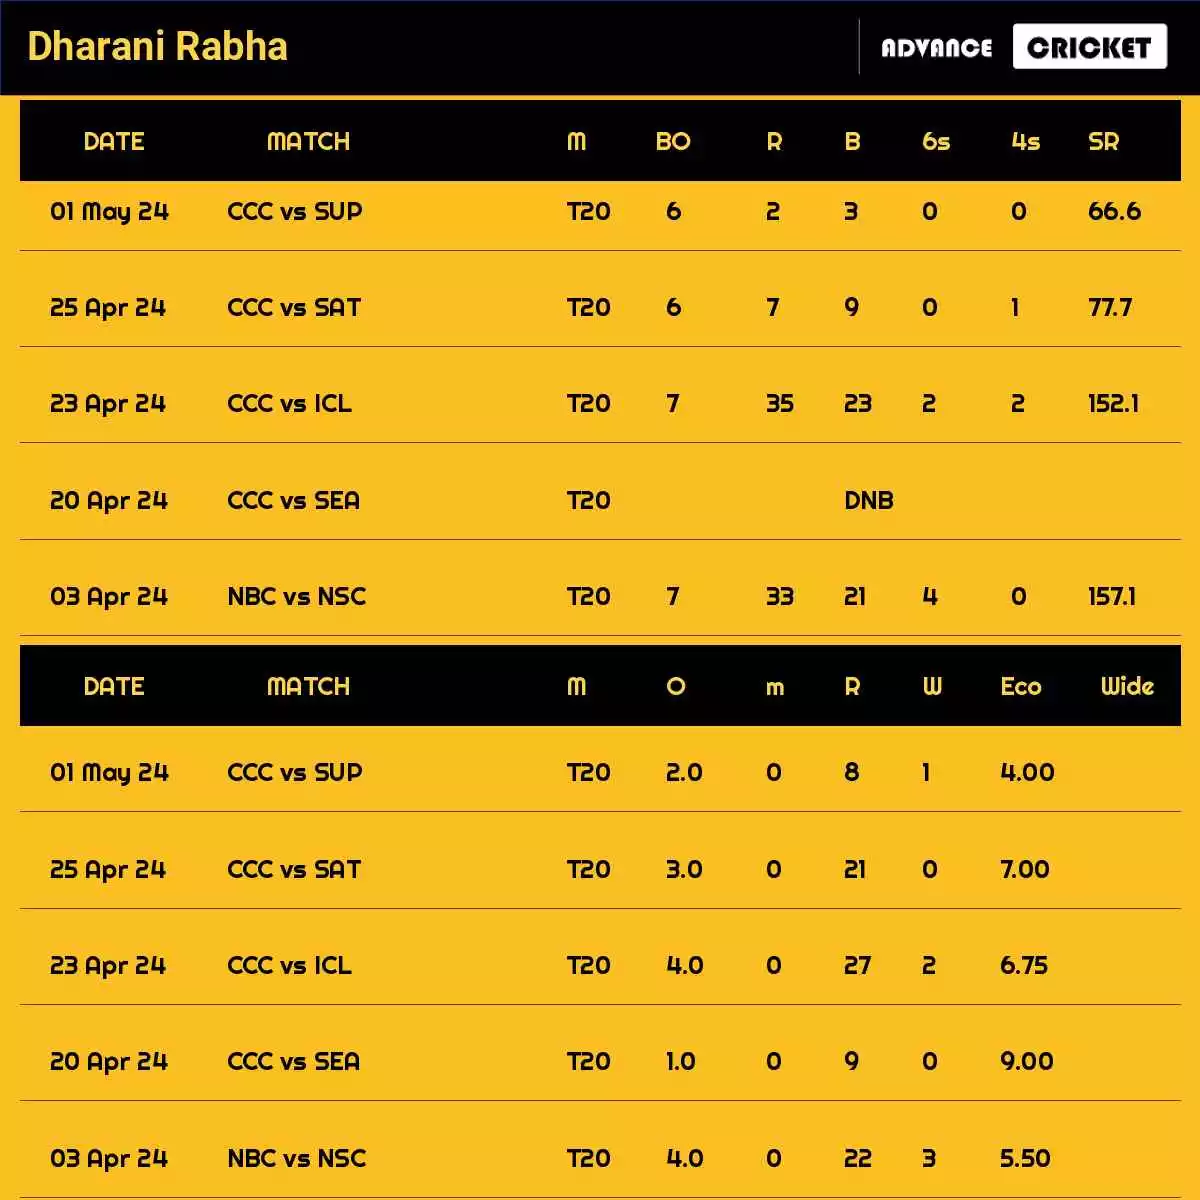 Dharani Rabha Recent Matches Details Date Wise